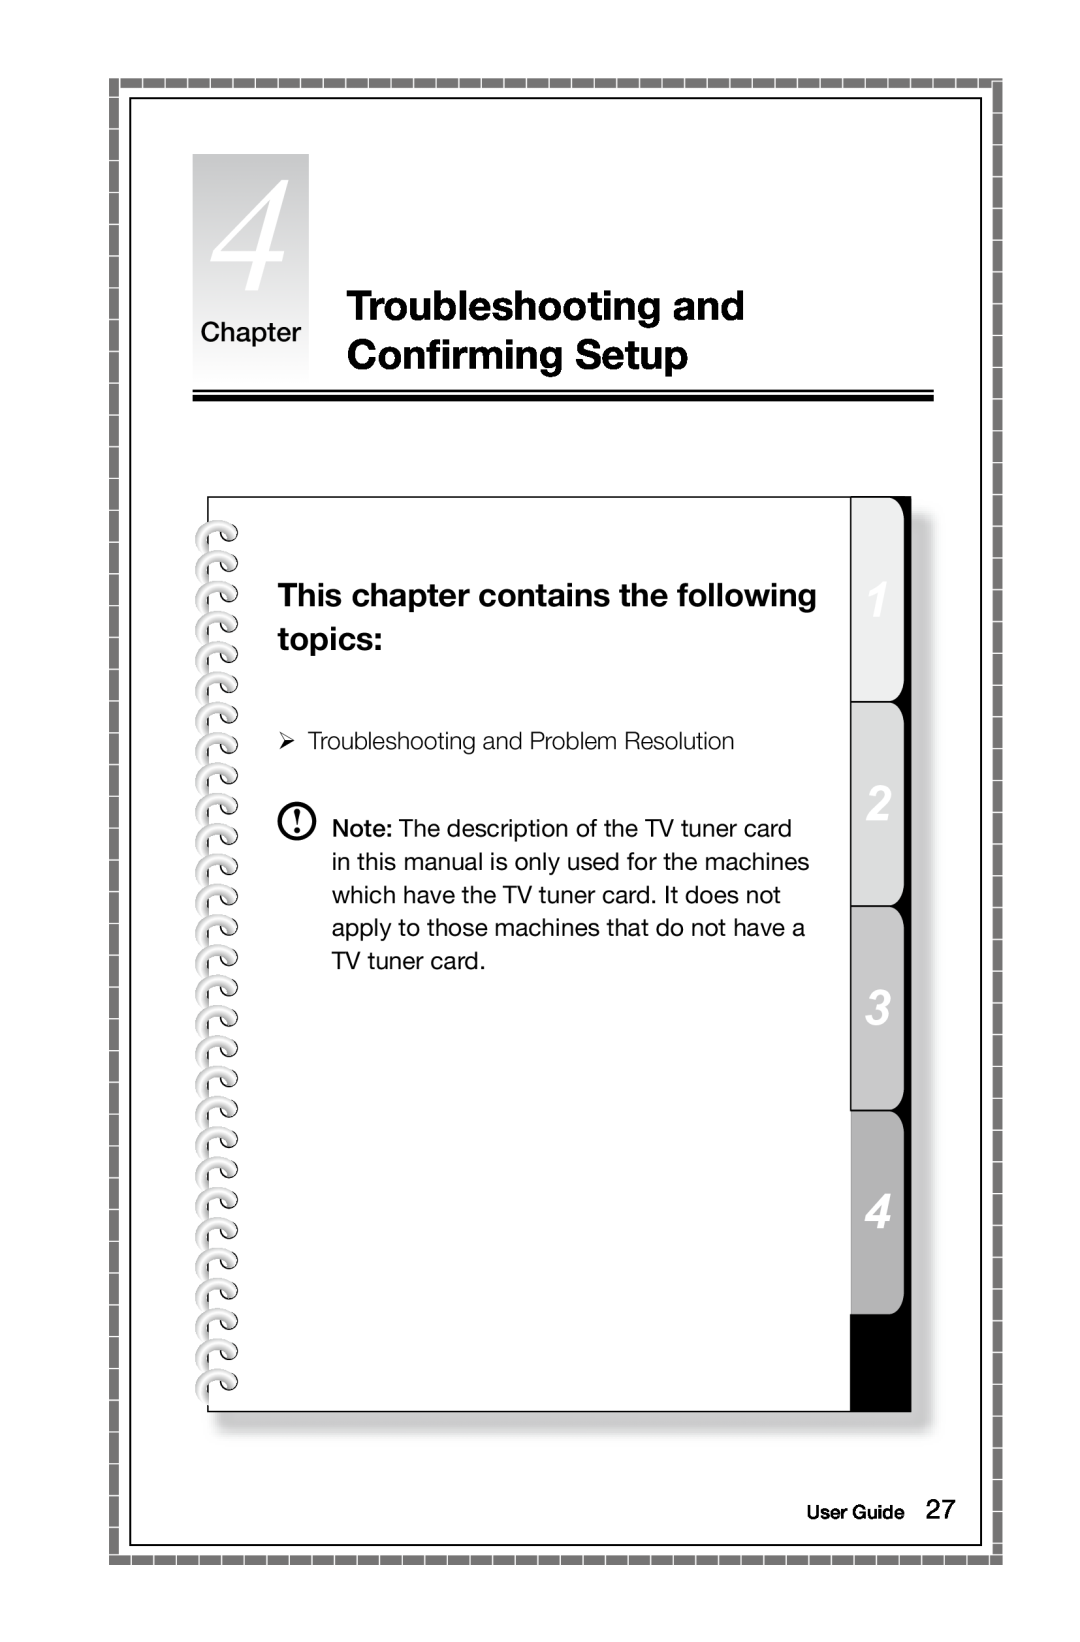 Lenovo 10073/1169 Troubleshooting and Chapter Confirming Setup, This chapter contains the following topics, User Guide 